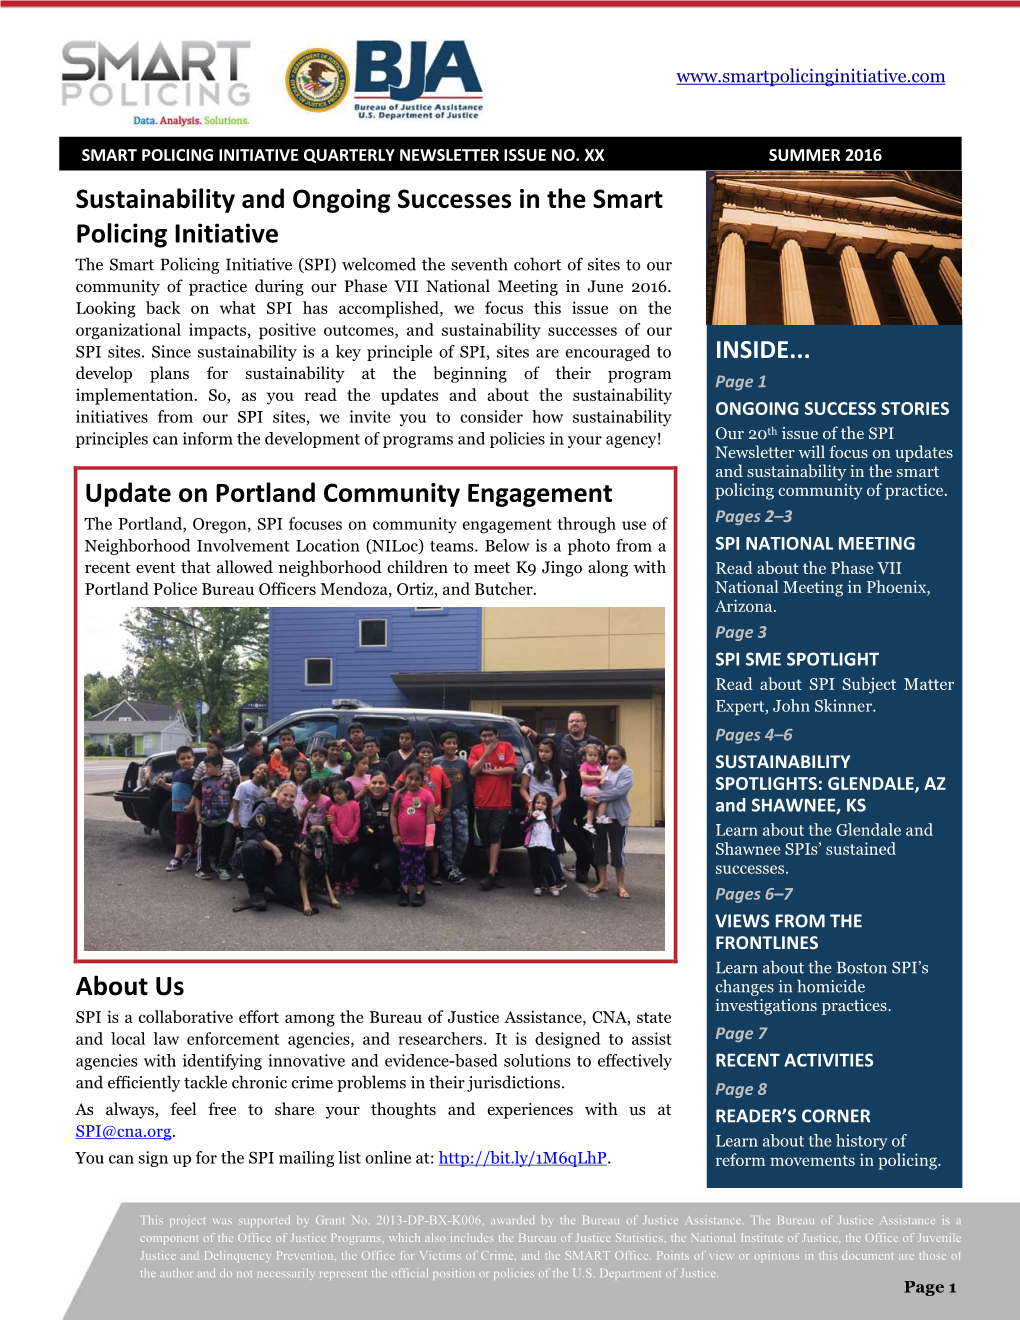 Sustainability and Ongoing Successes in the Smart Policing Initiative